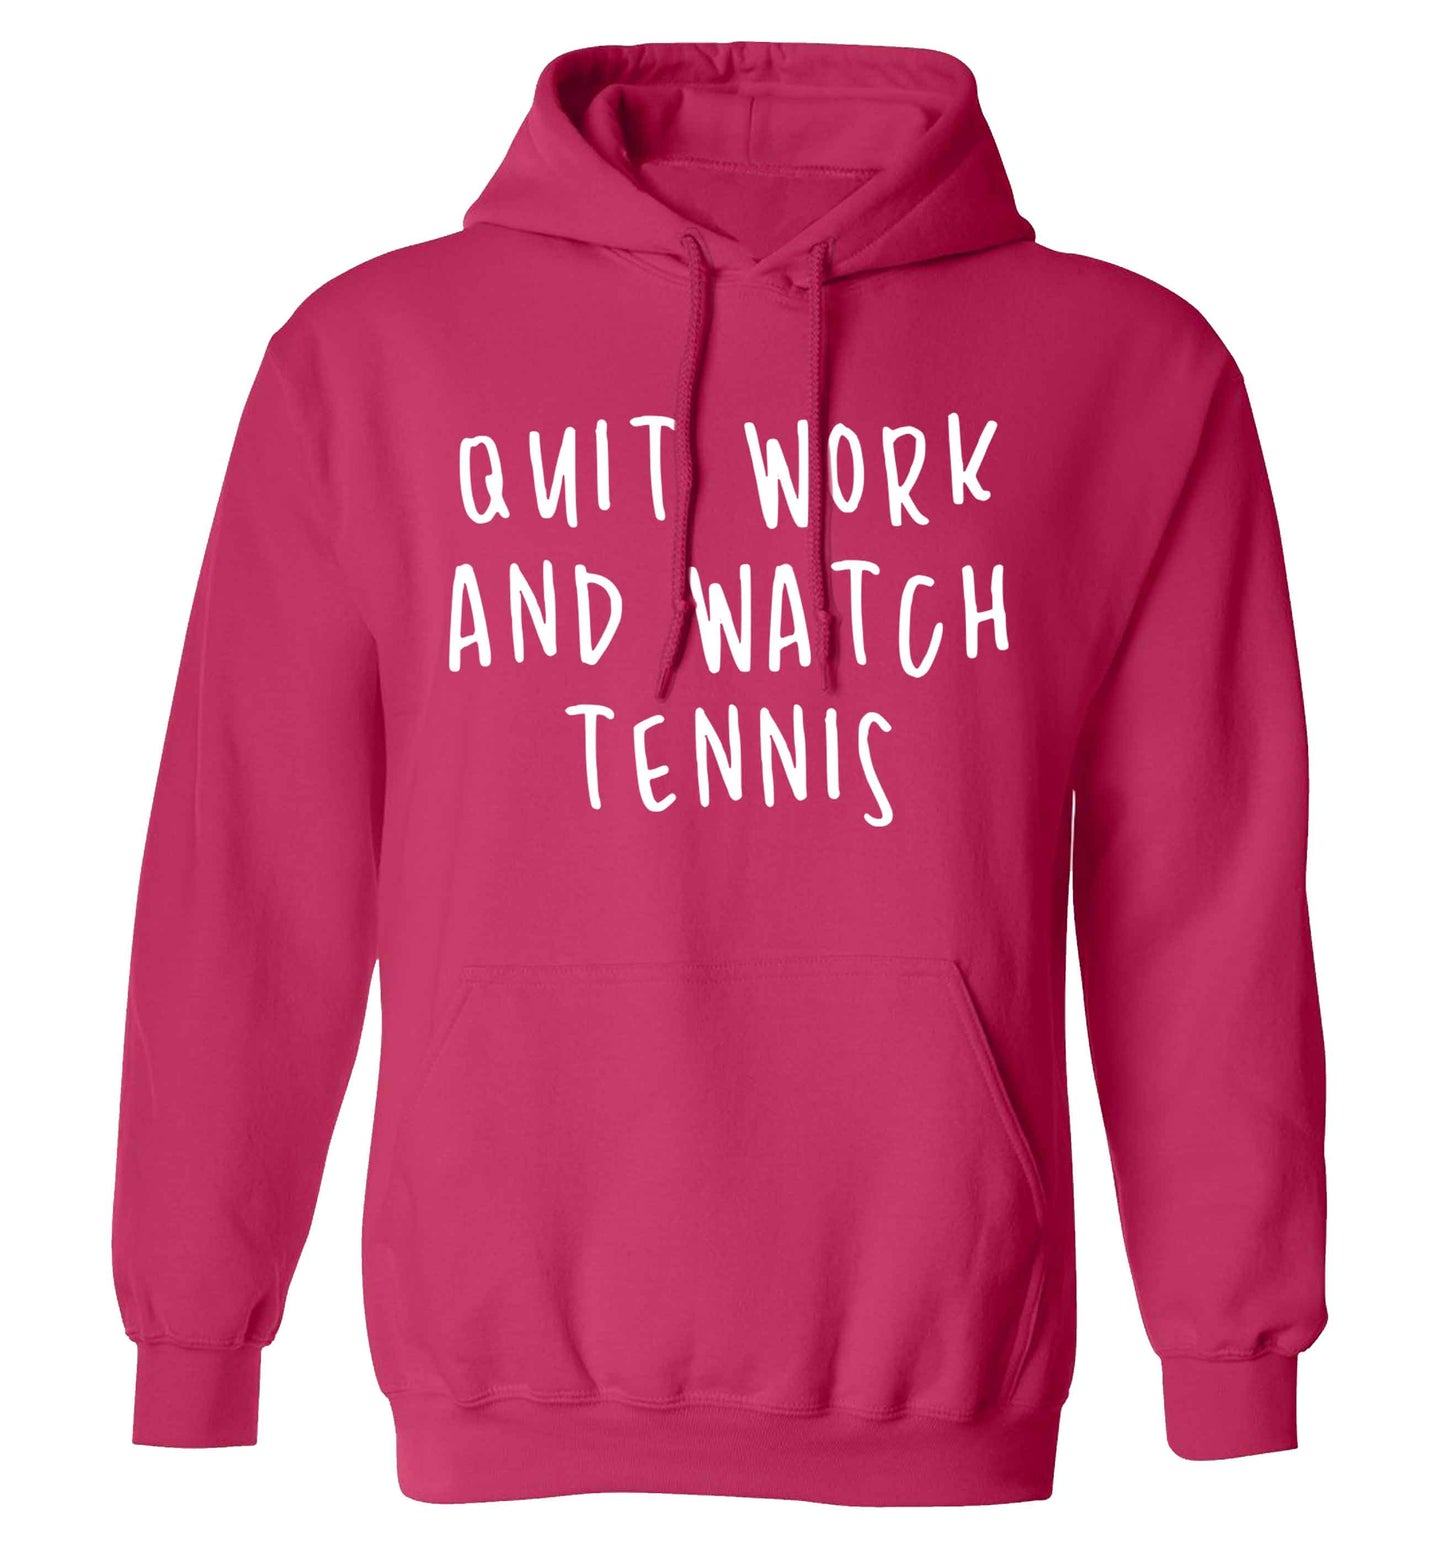 Quit work and watch tennis adults unisex pink hoodie 2XL